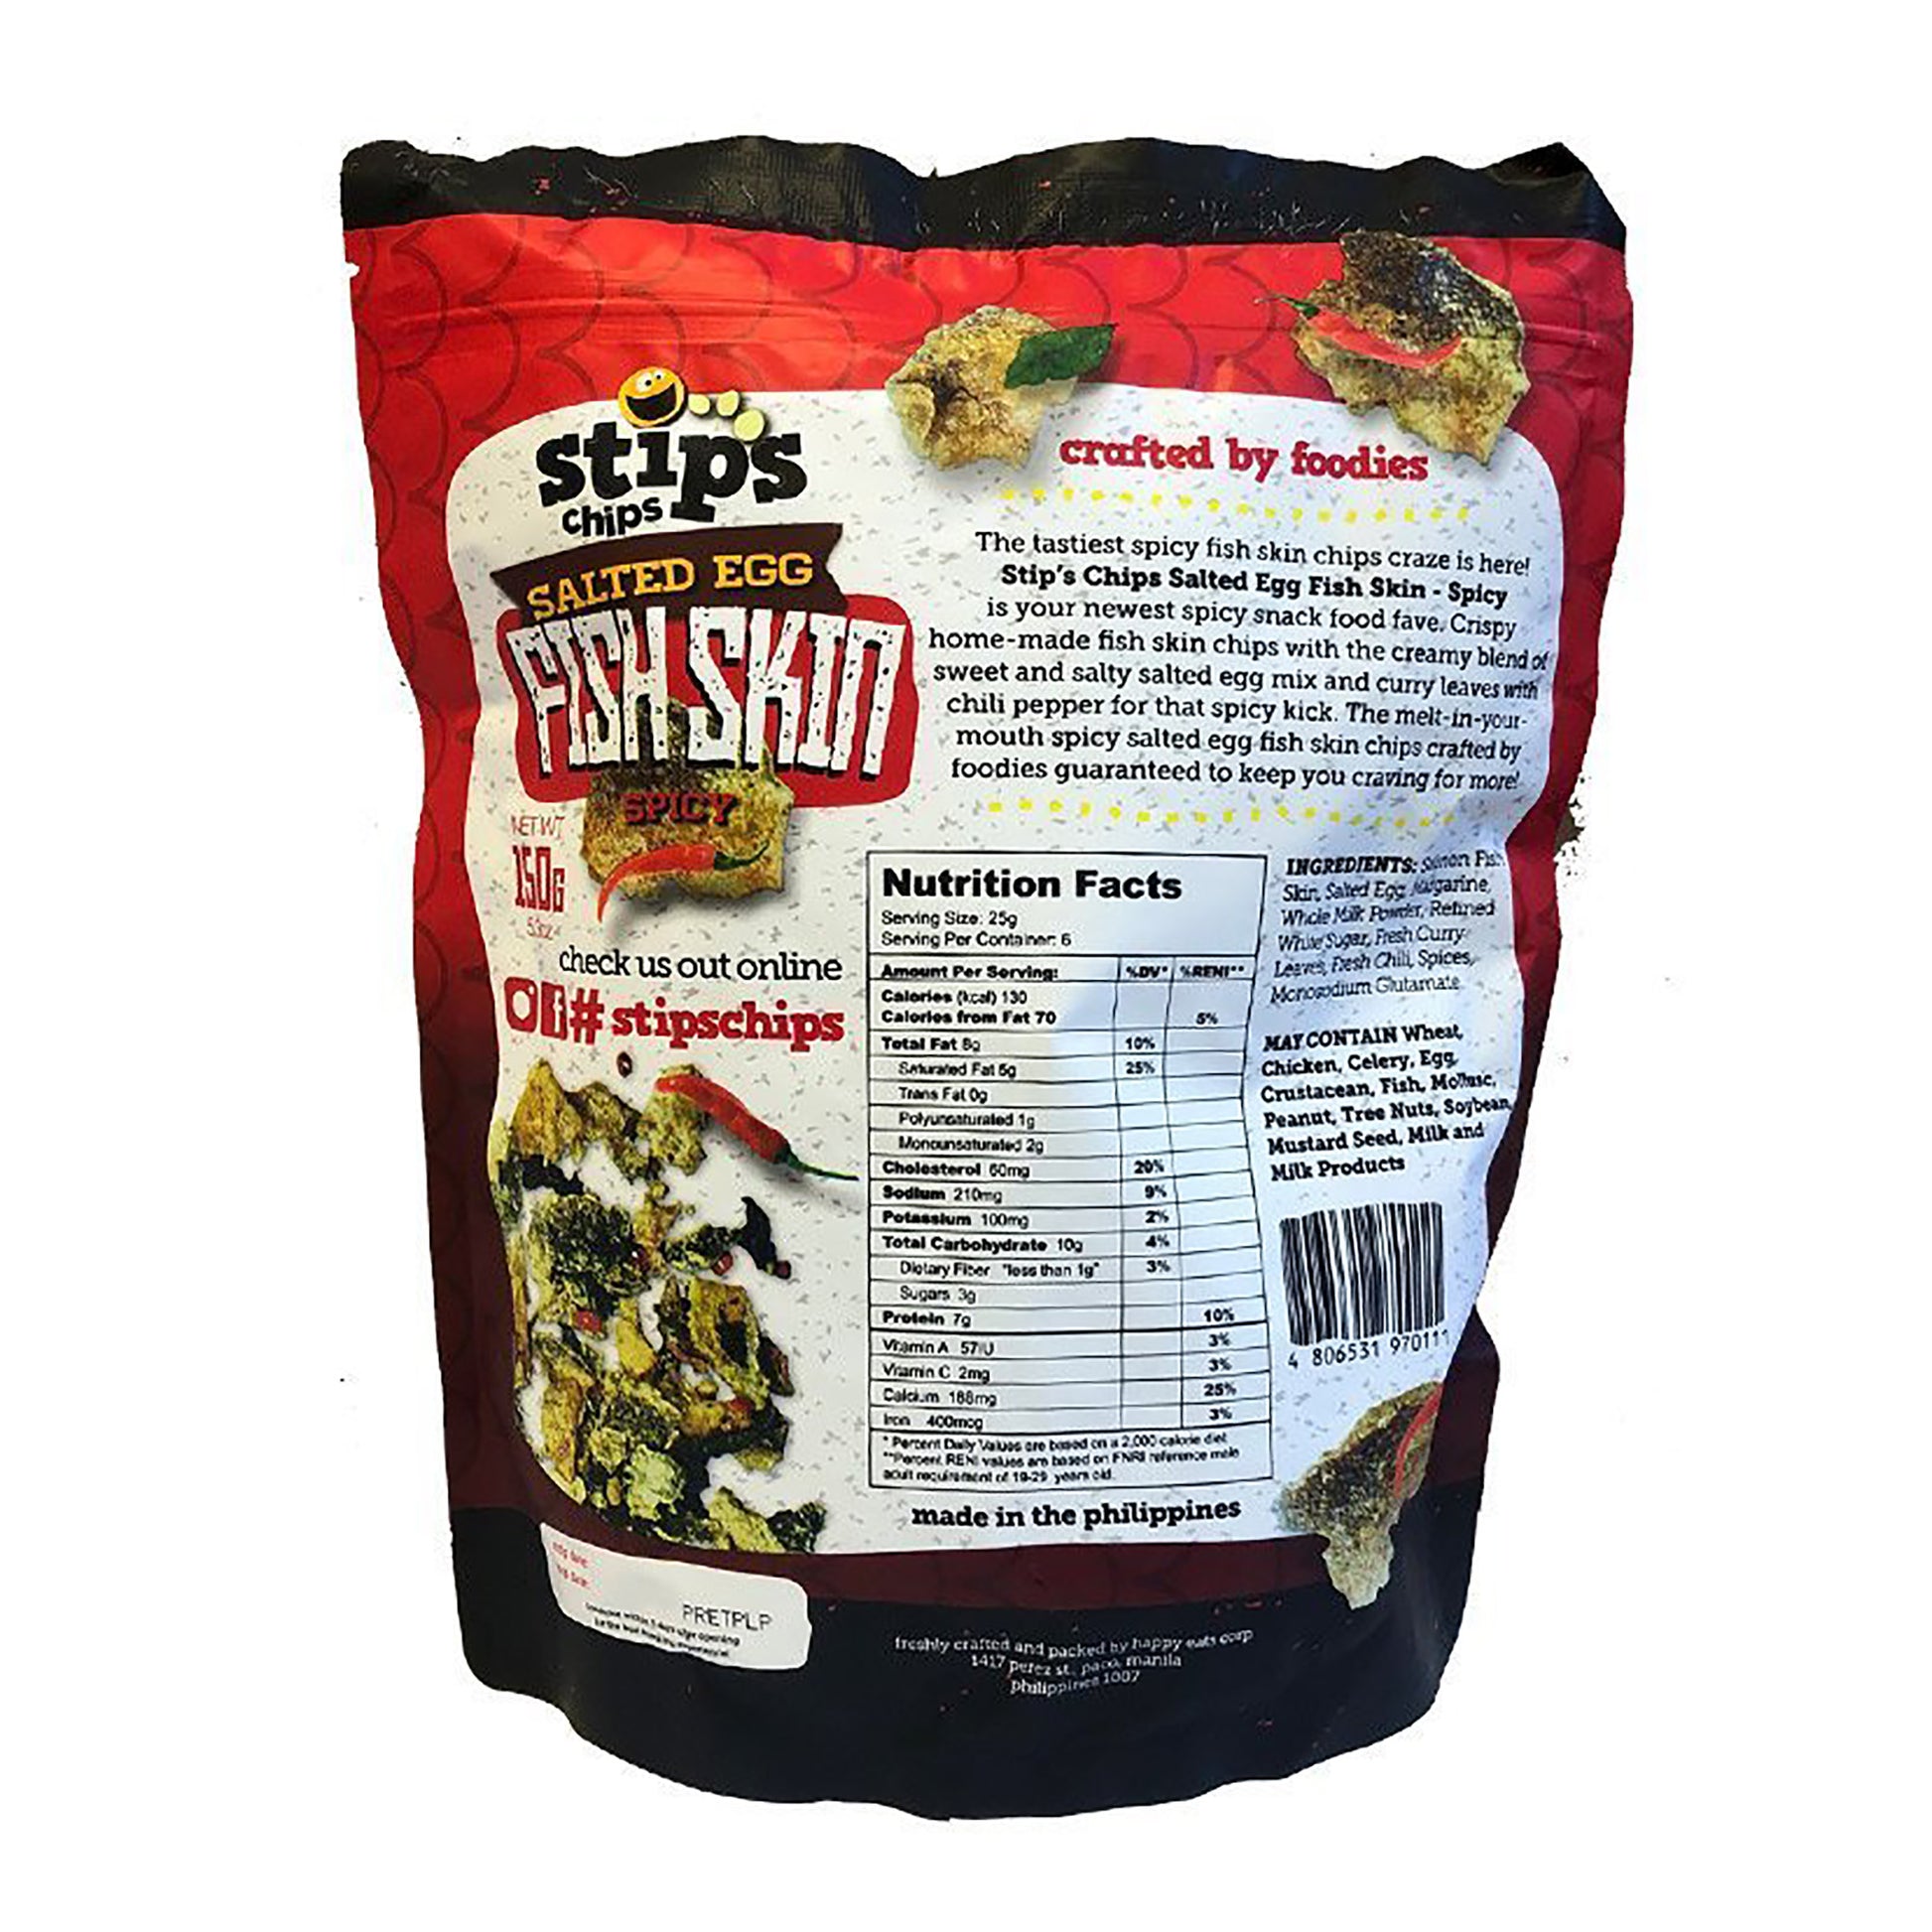 Back graphic image of Stips Salted Egg Fish Skin - Spicy 5.29oz